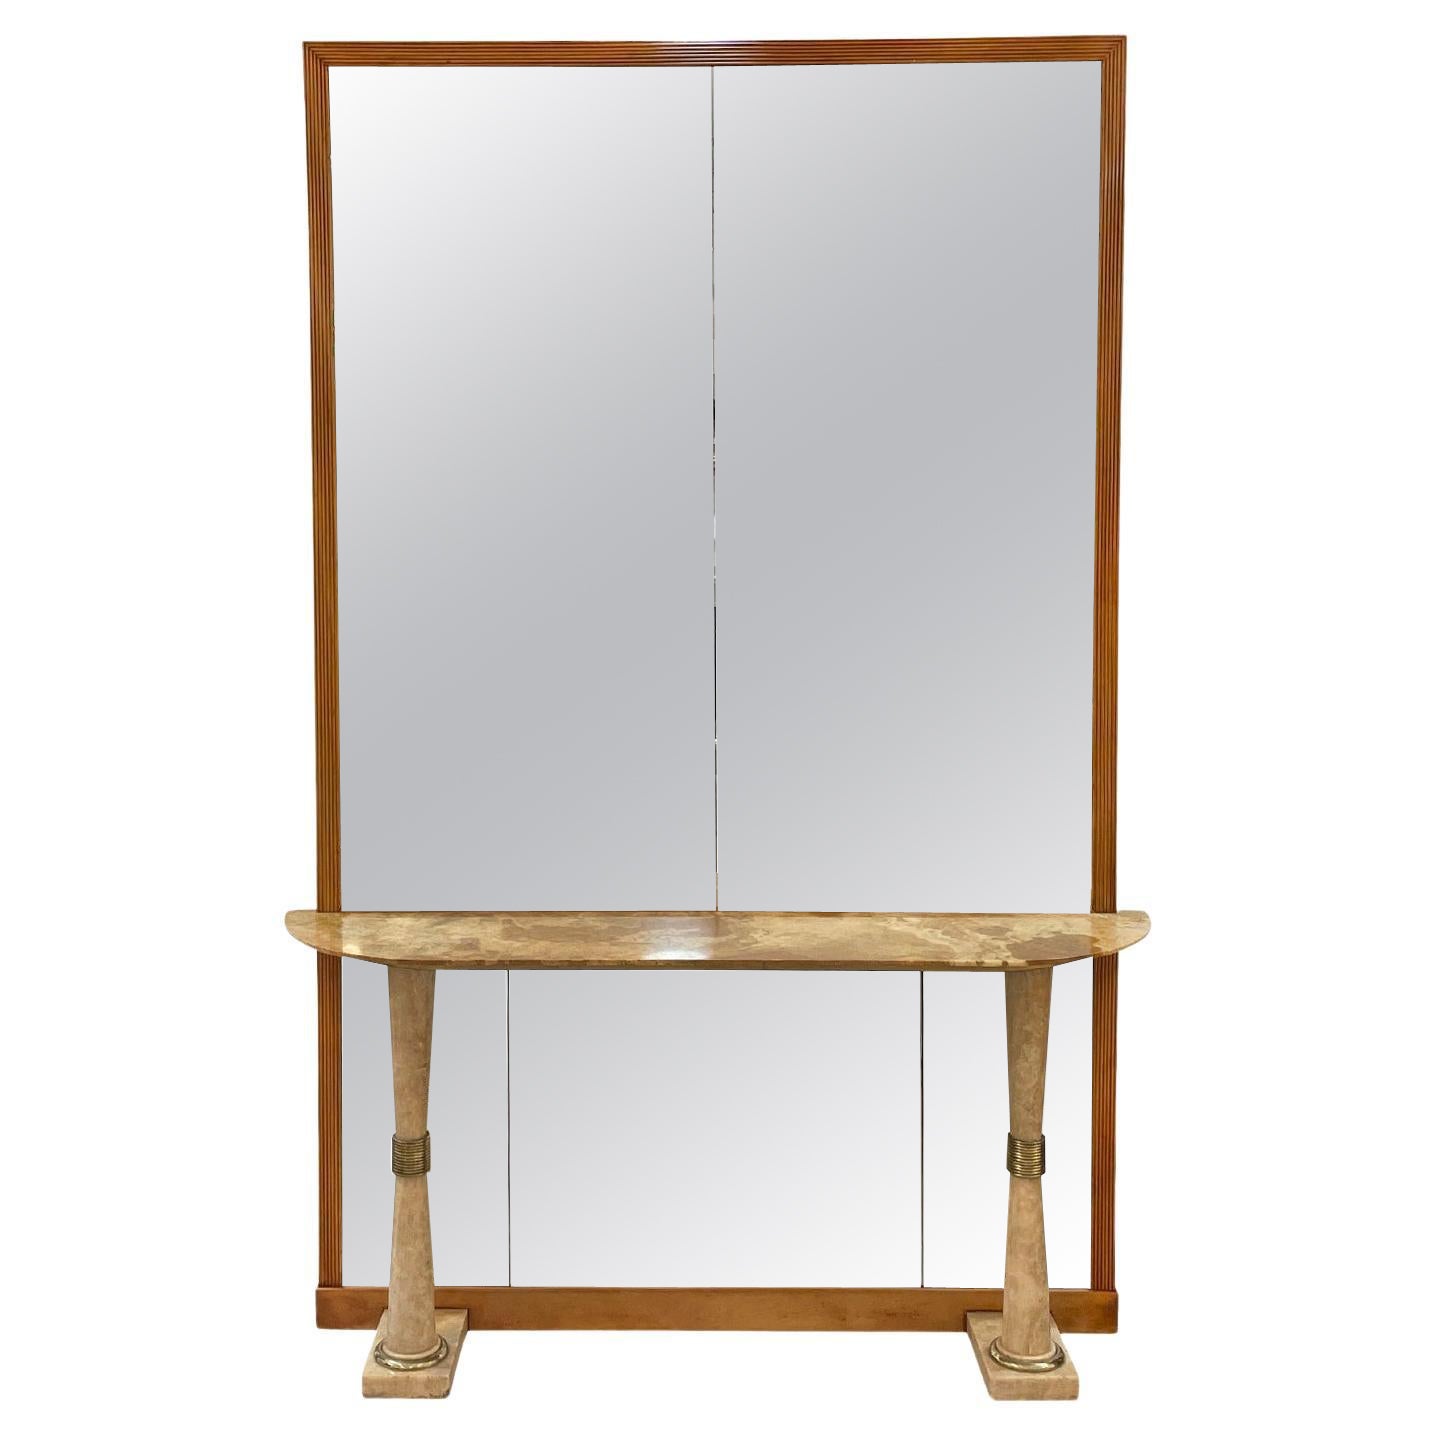 20th Century Italian Mid-Century Modern Marble Console Table & Glass Wall Mirror For Sale